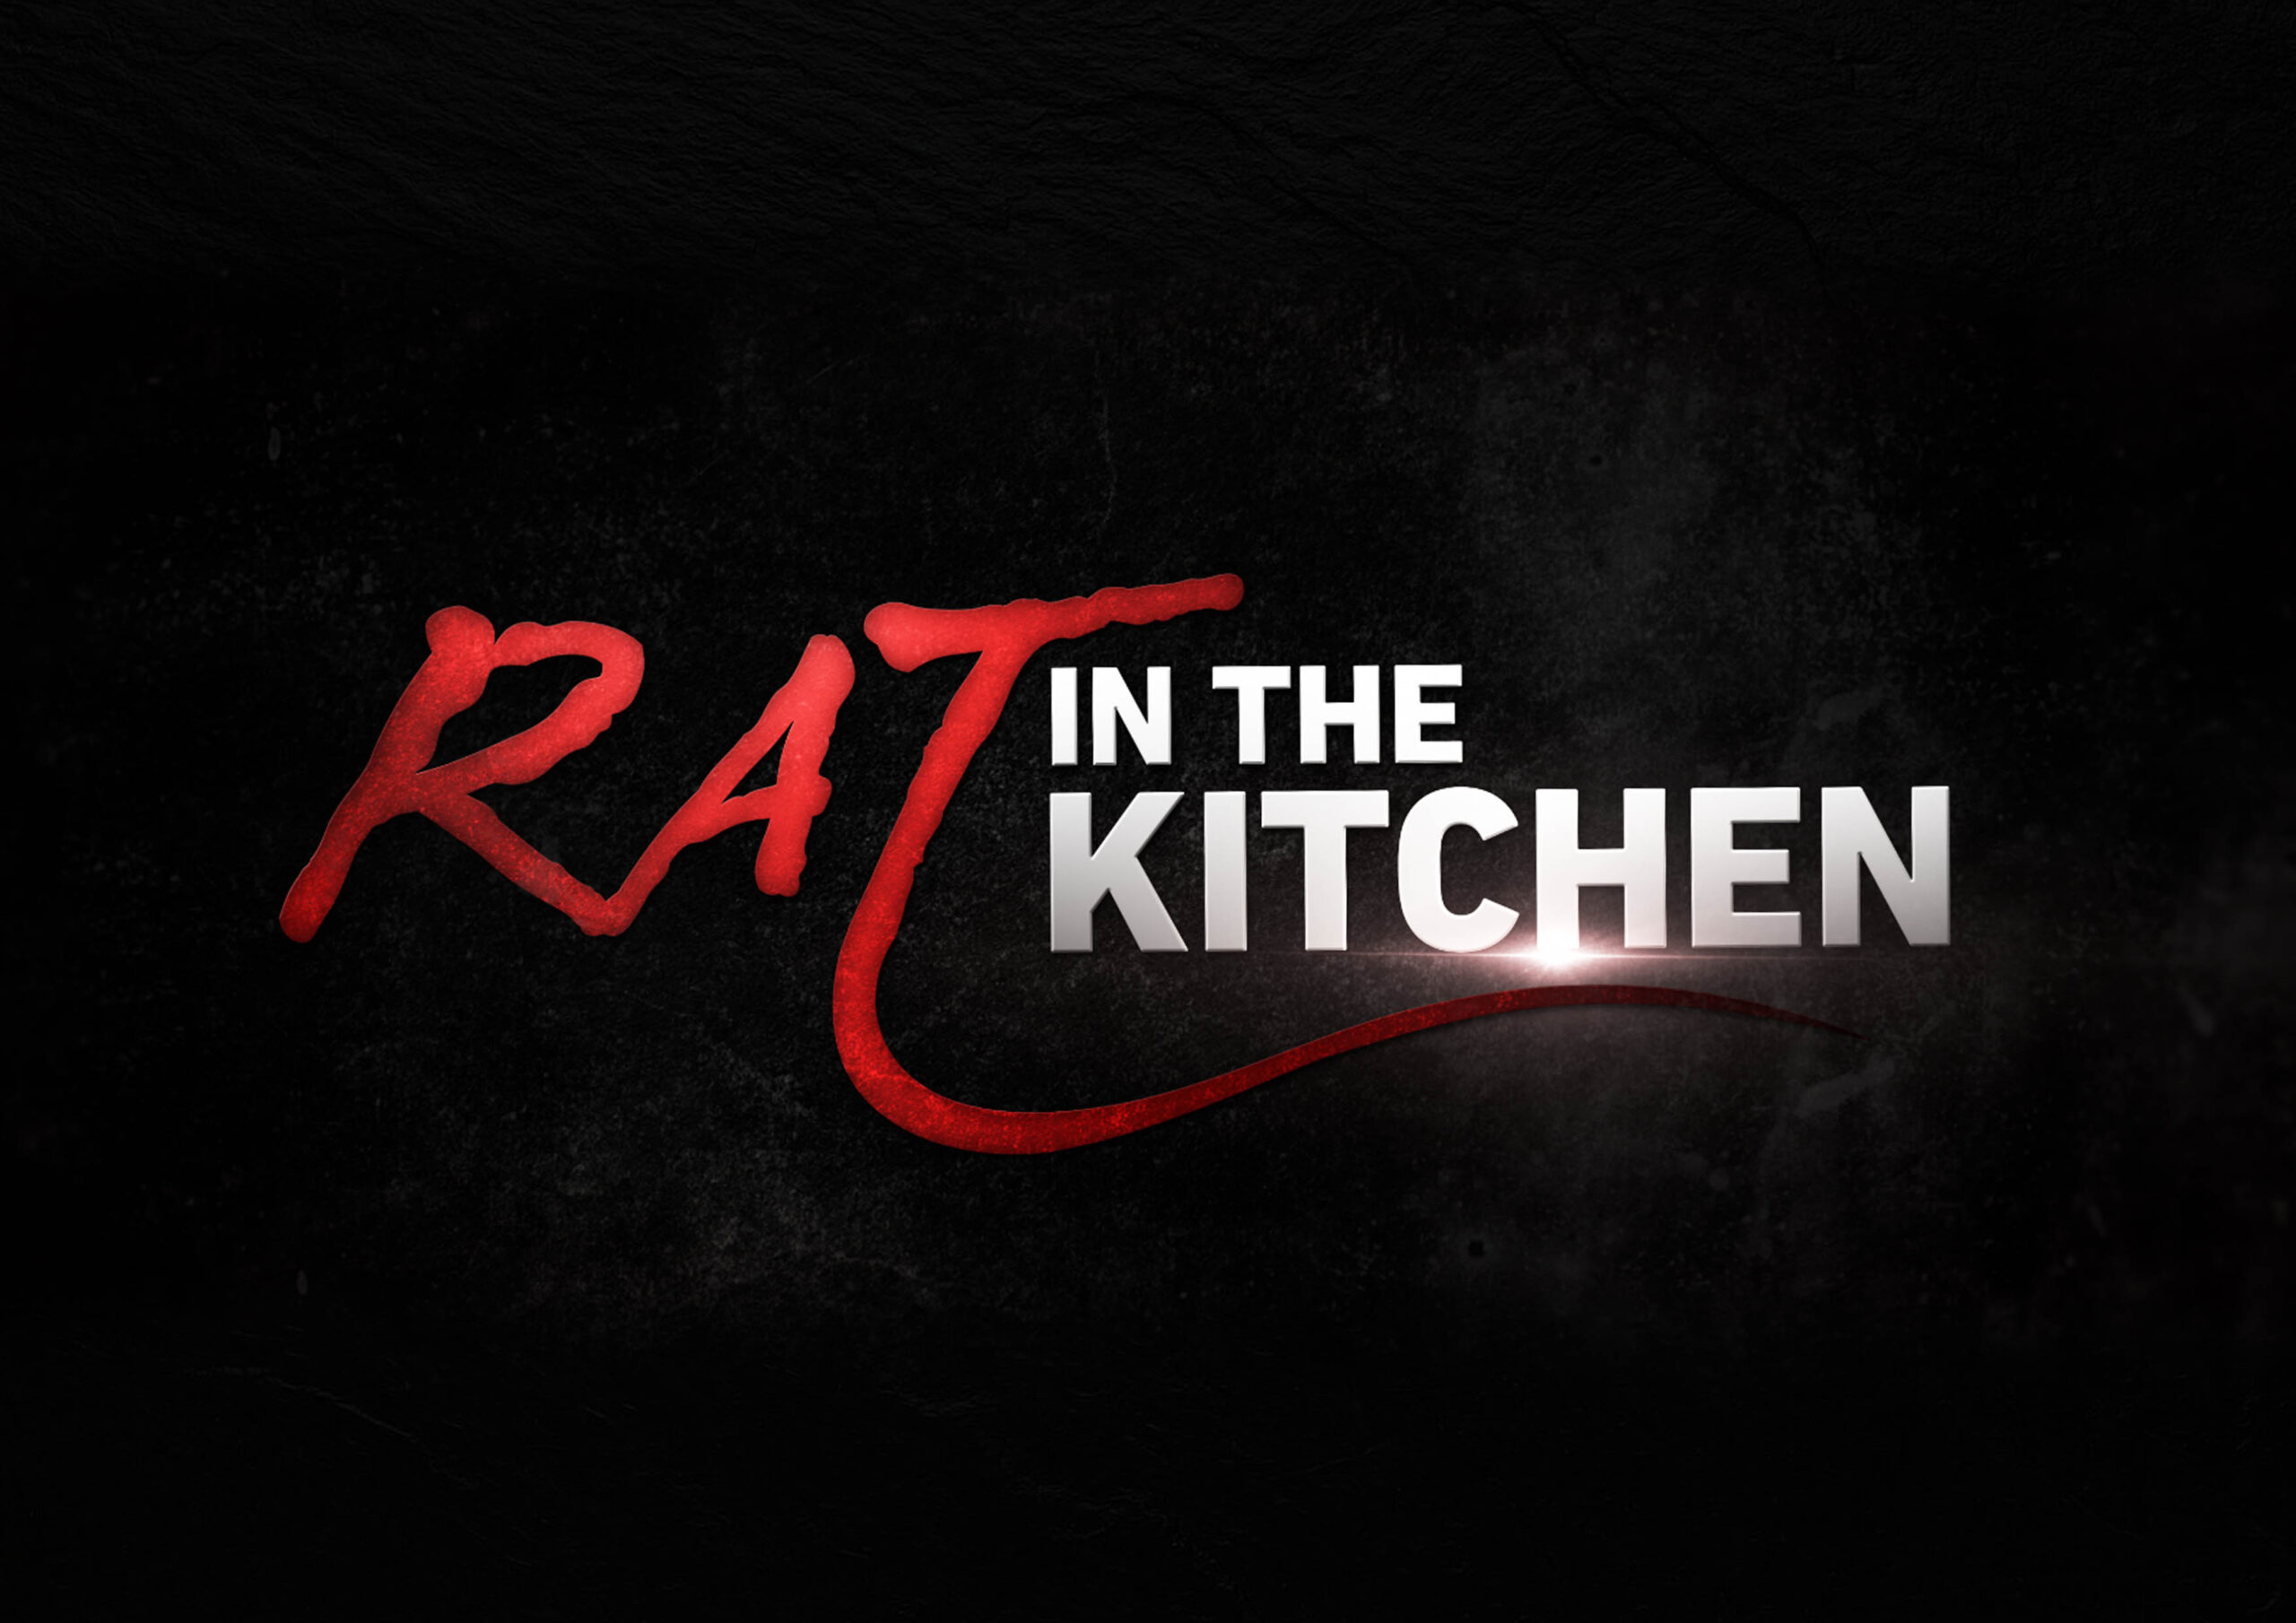 Rat In The Kitchen commissioned by TBS